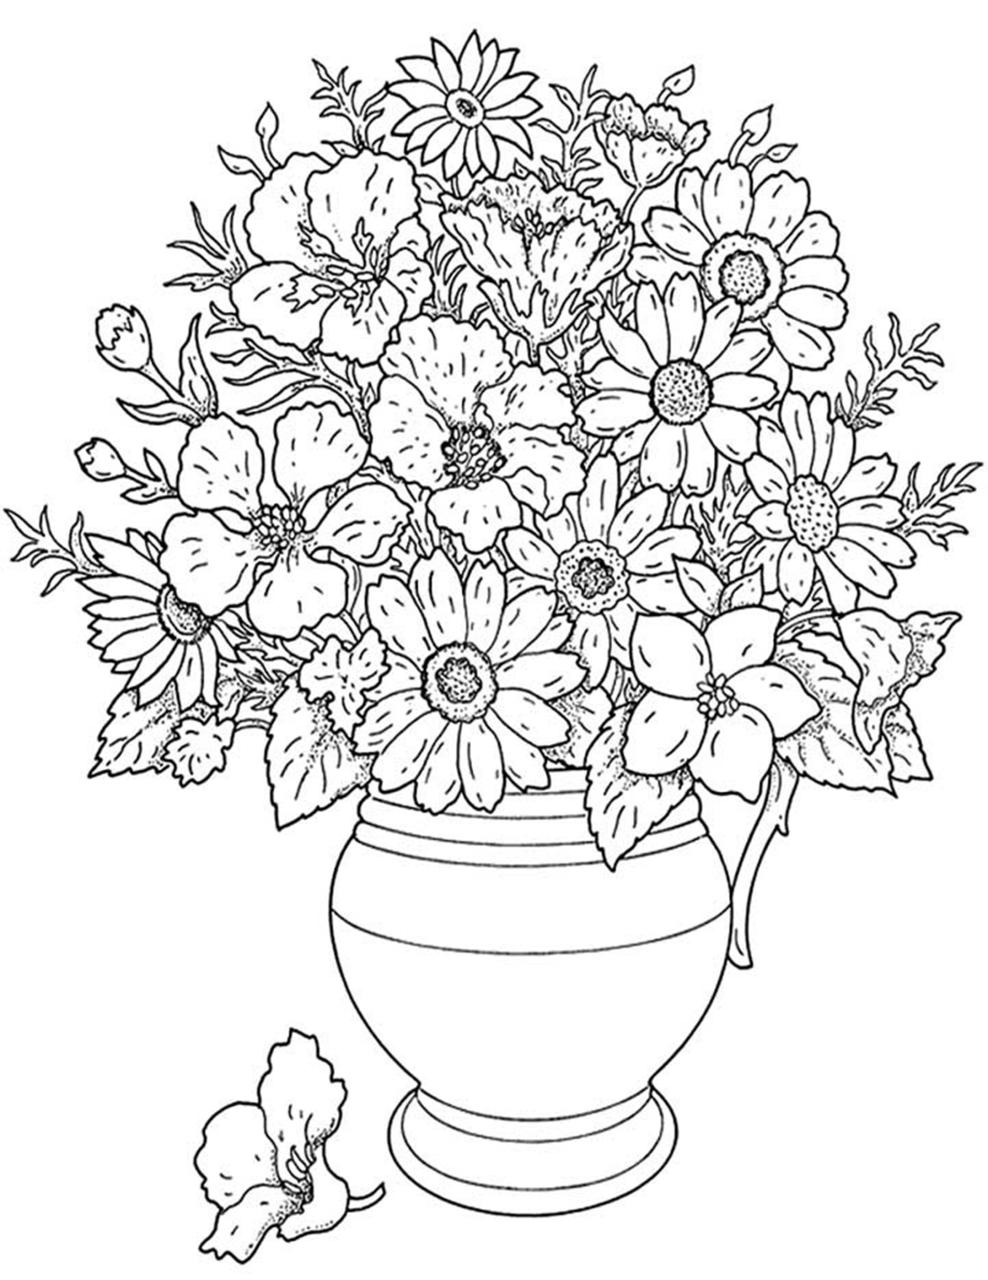 Cool Flowers Coloring Pages To Print Ideas